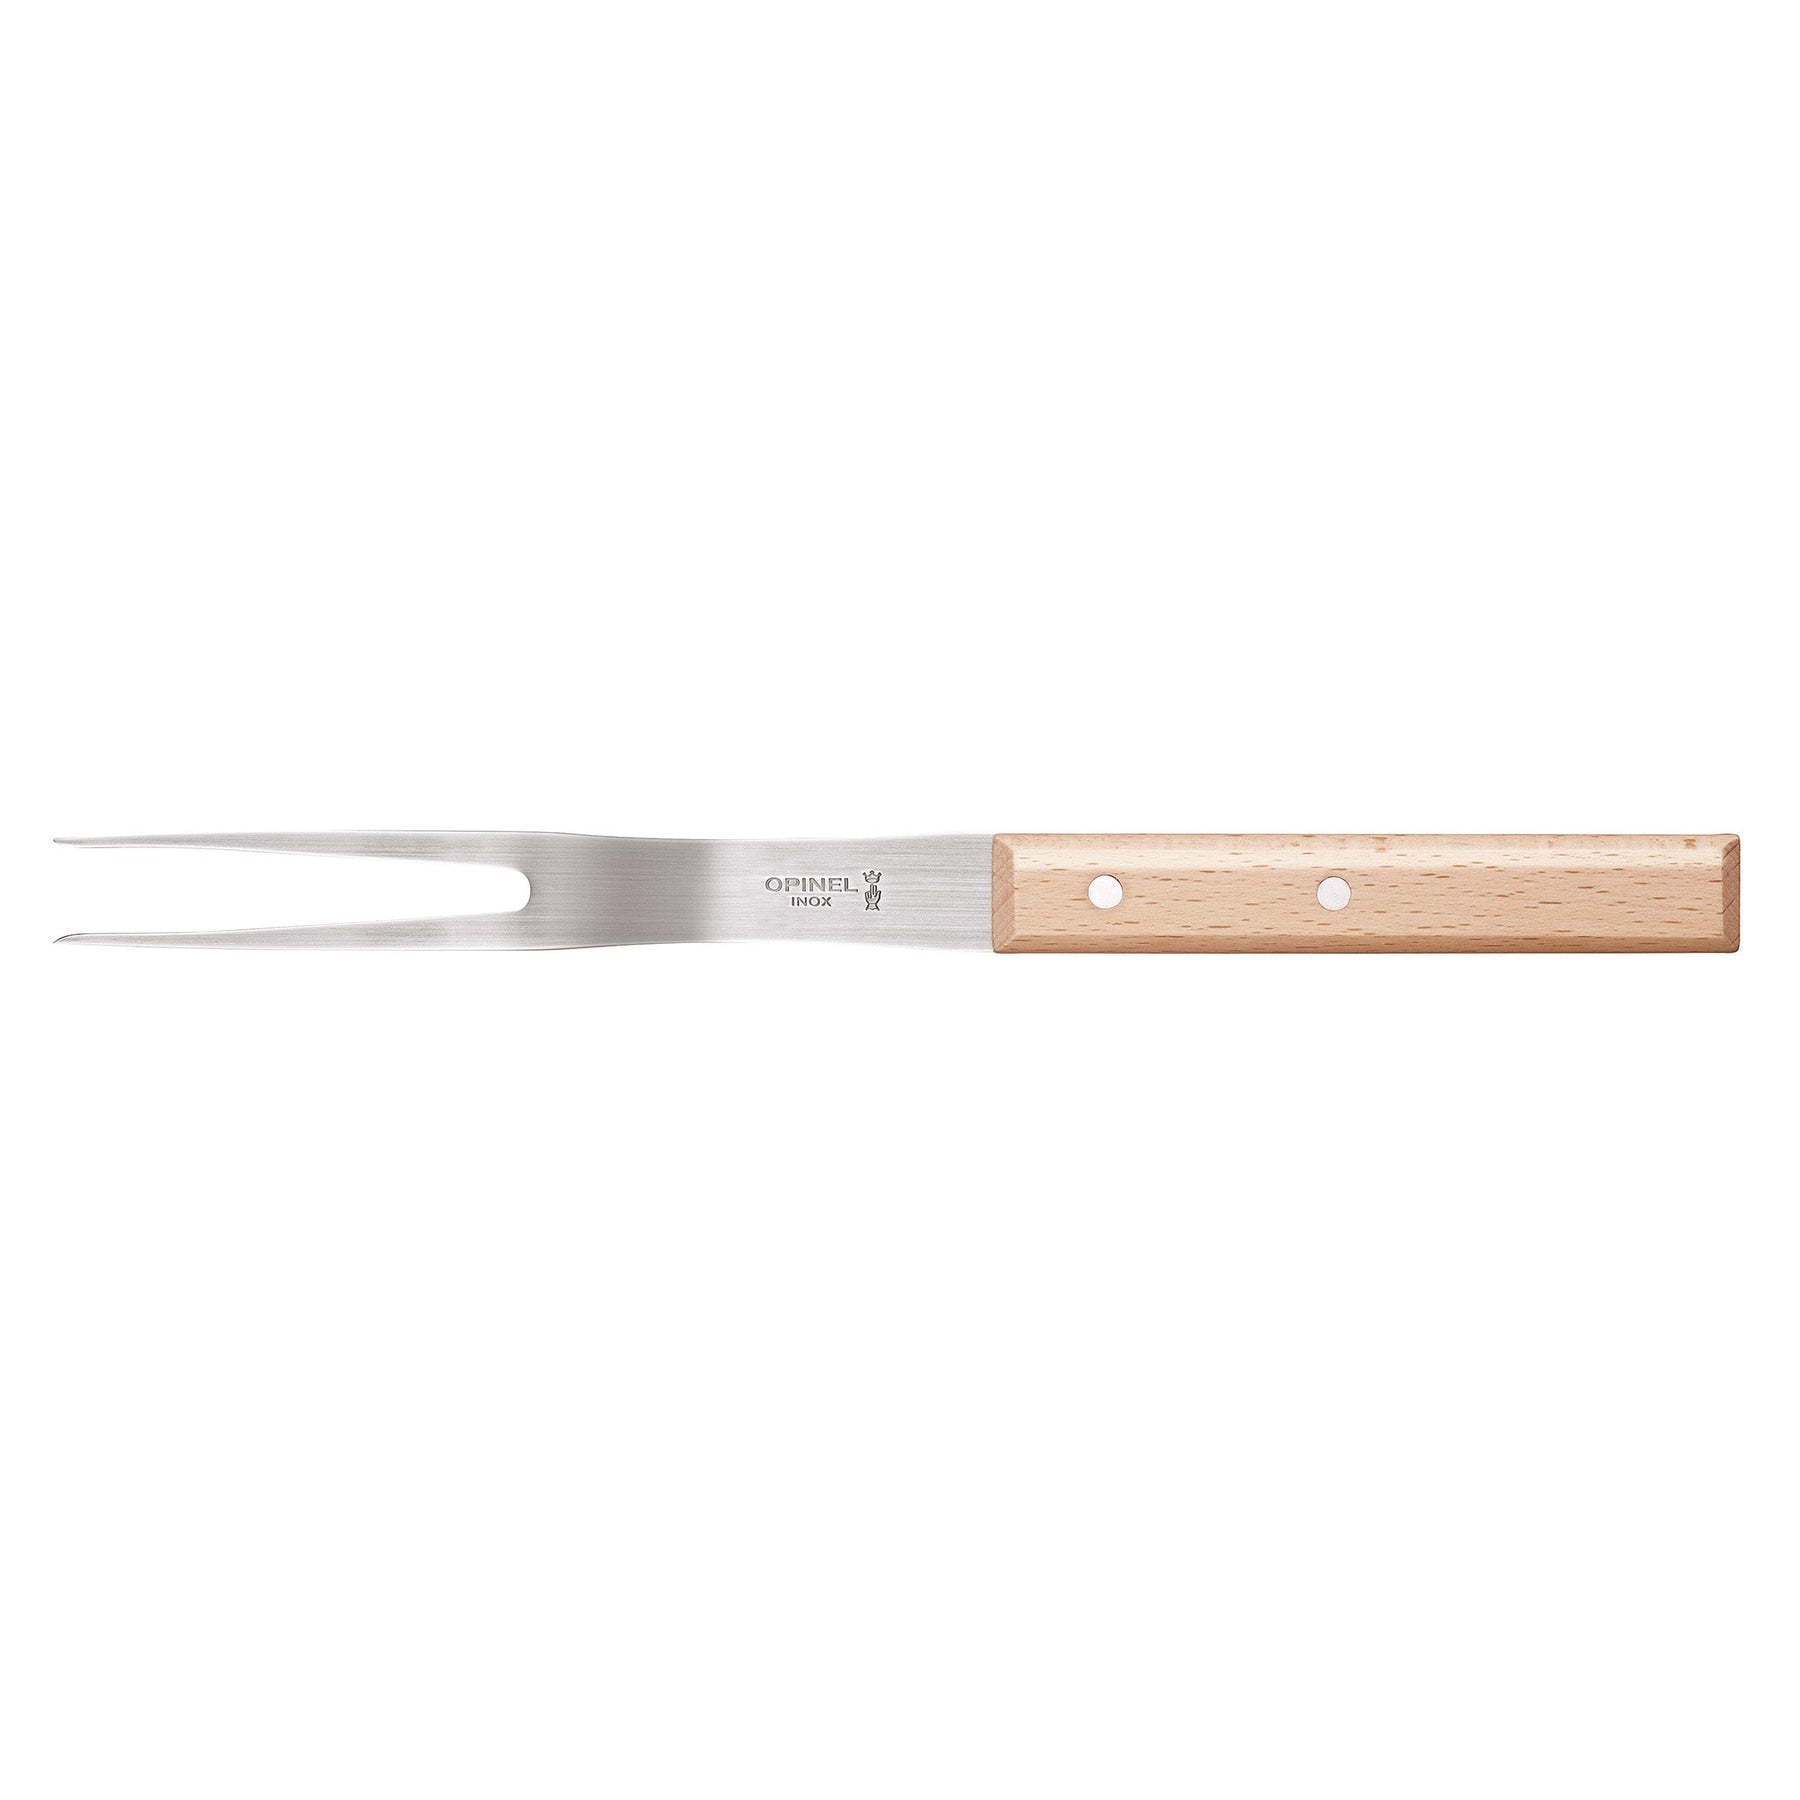 Opinel No.124 Carving Fork - Opinel USA Inc -bluecashew kitchen homestead